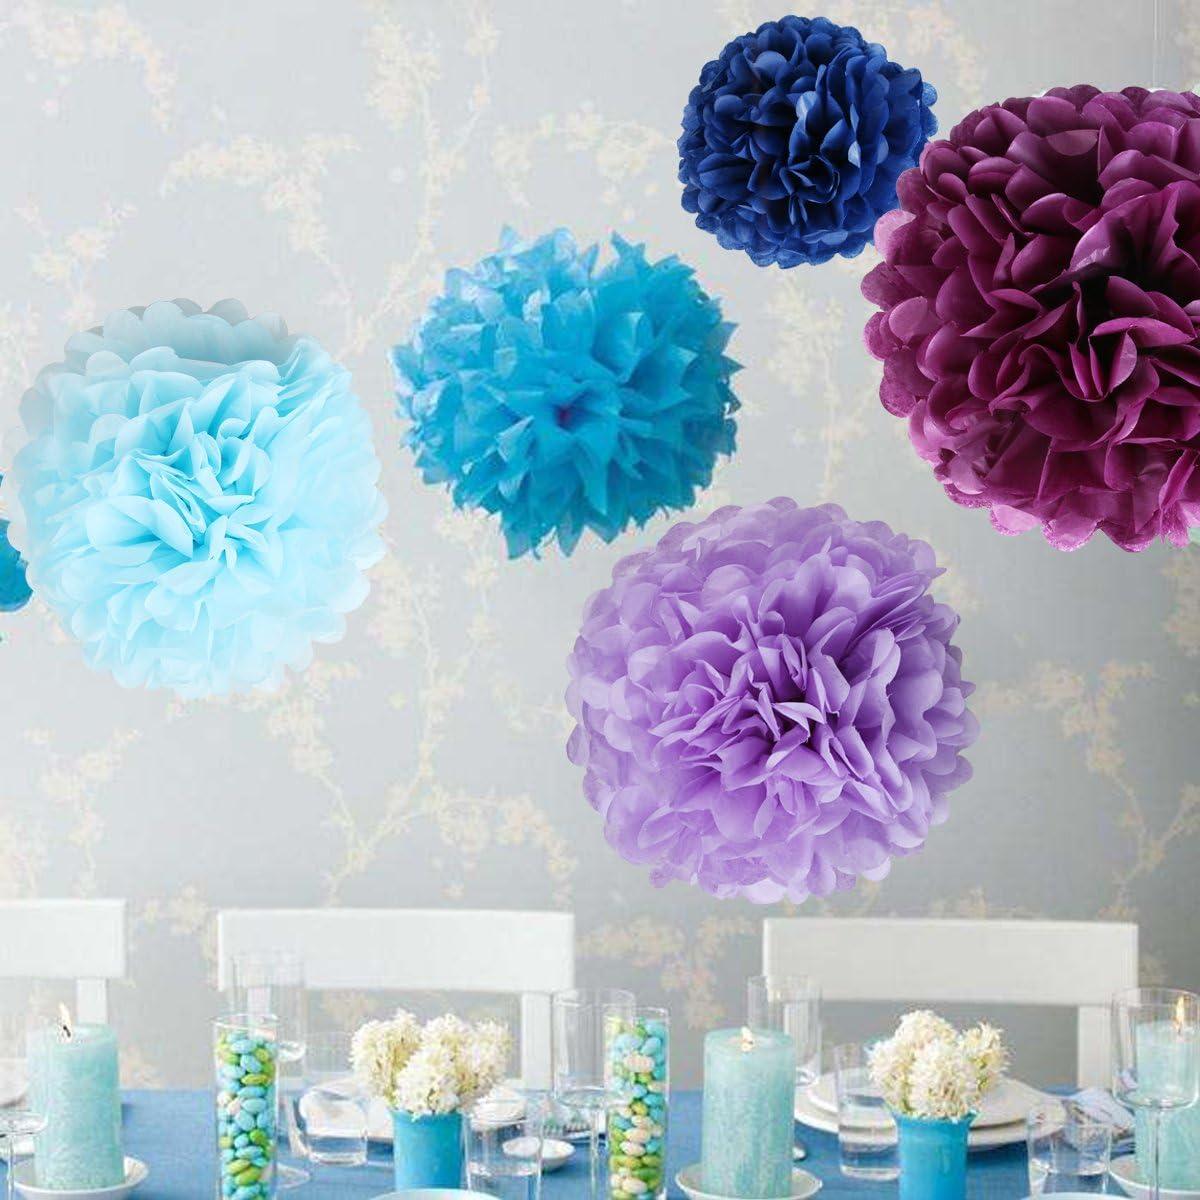 3pcs Black Artificial Paper Flowers Tissue Paper Pom Poms for Birthday  Wedding Party Decorations